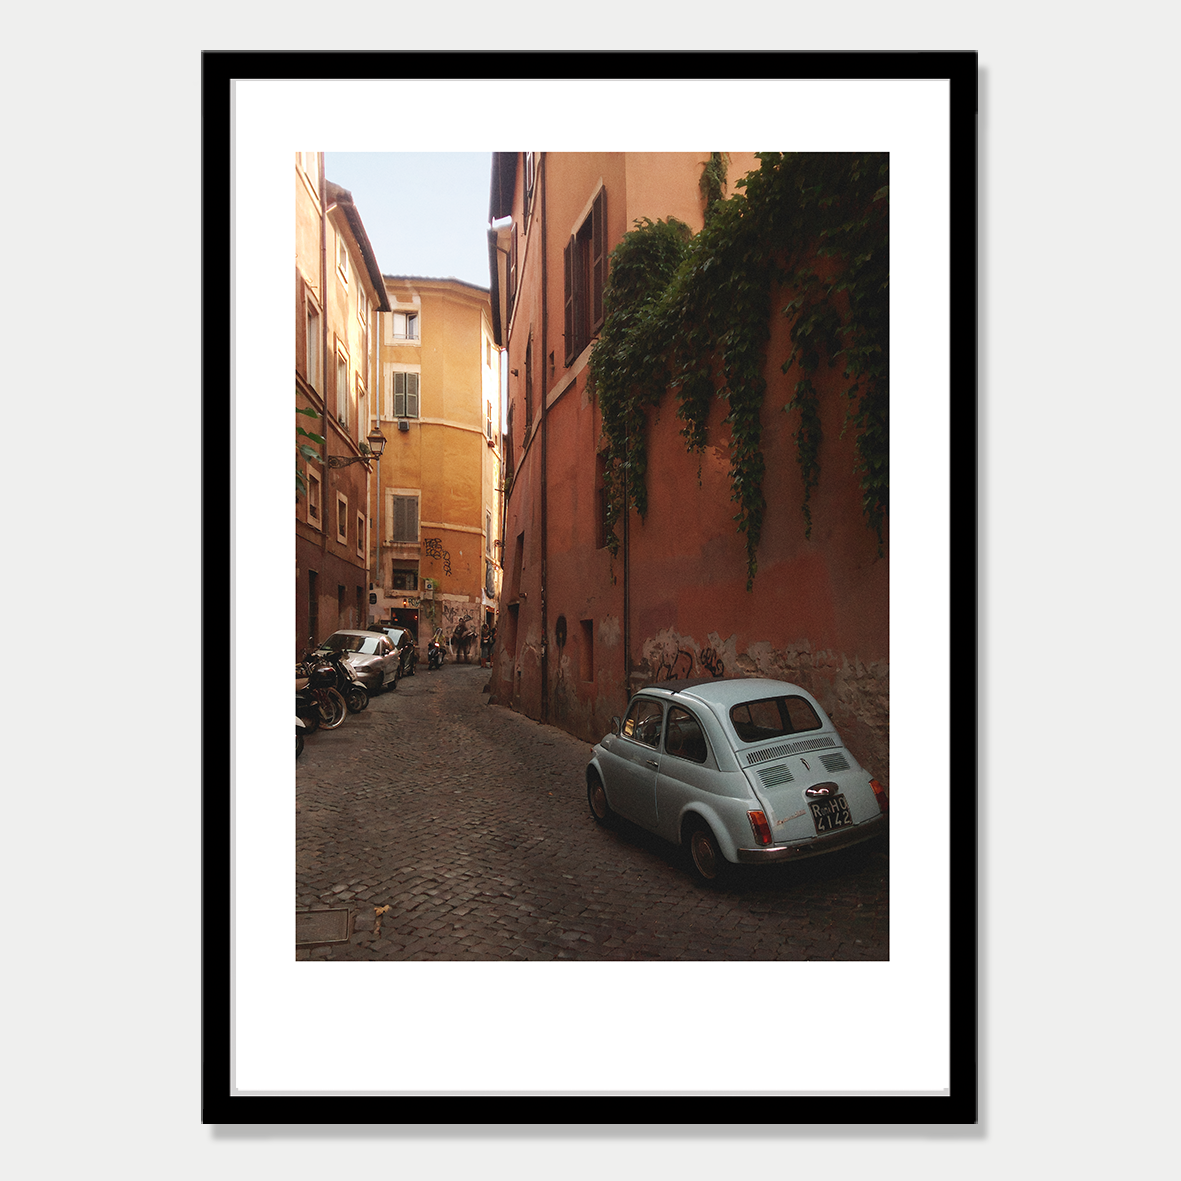 Little Car in a Backstreet of Trastavere, Rome Still Life Photographic Art Print in a Skinny Black Frame